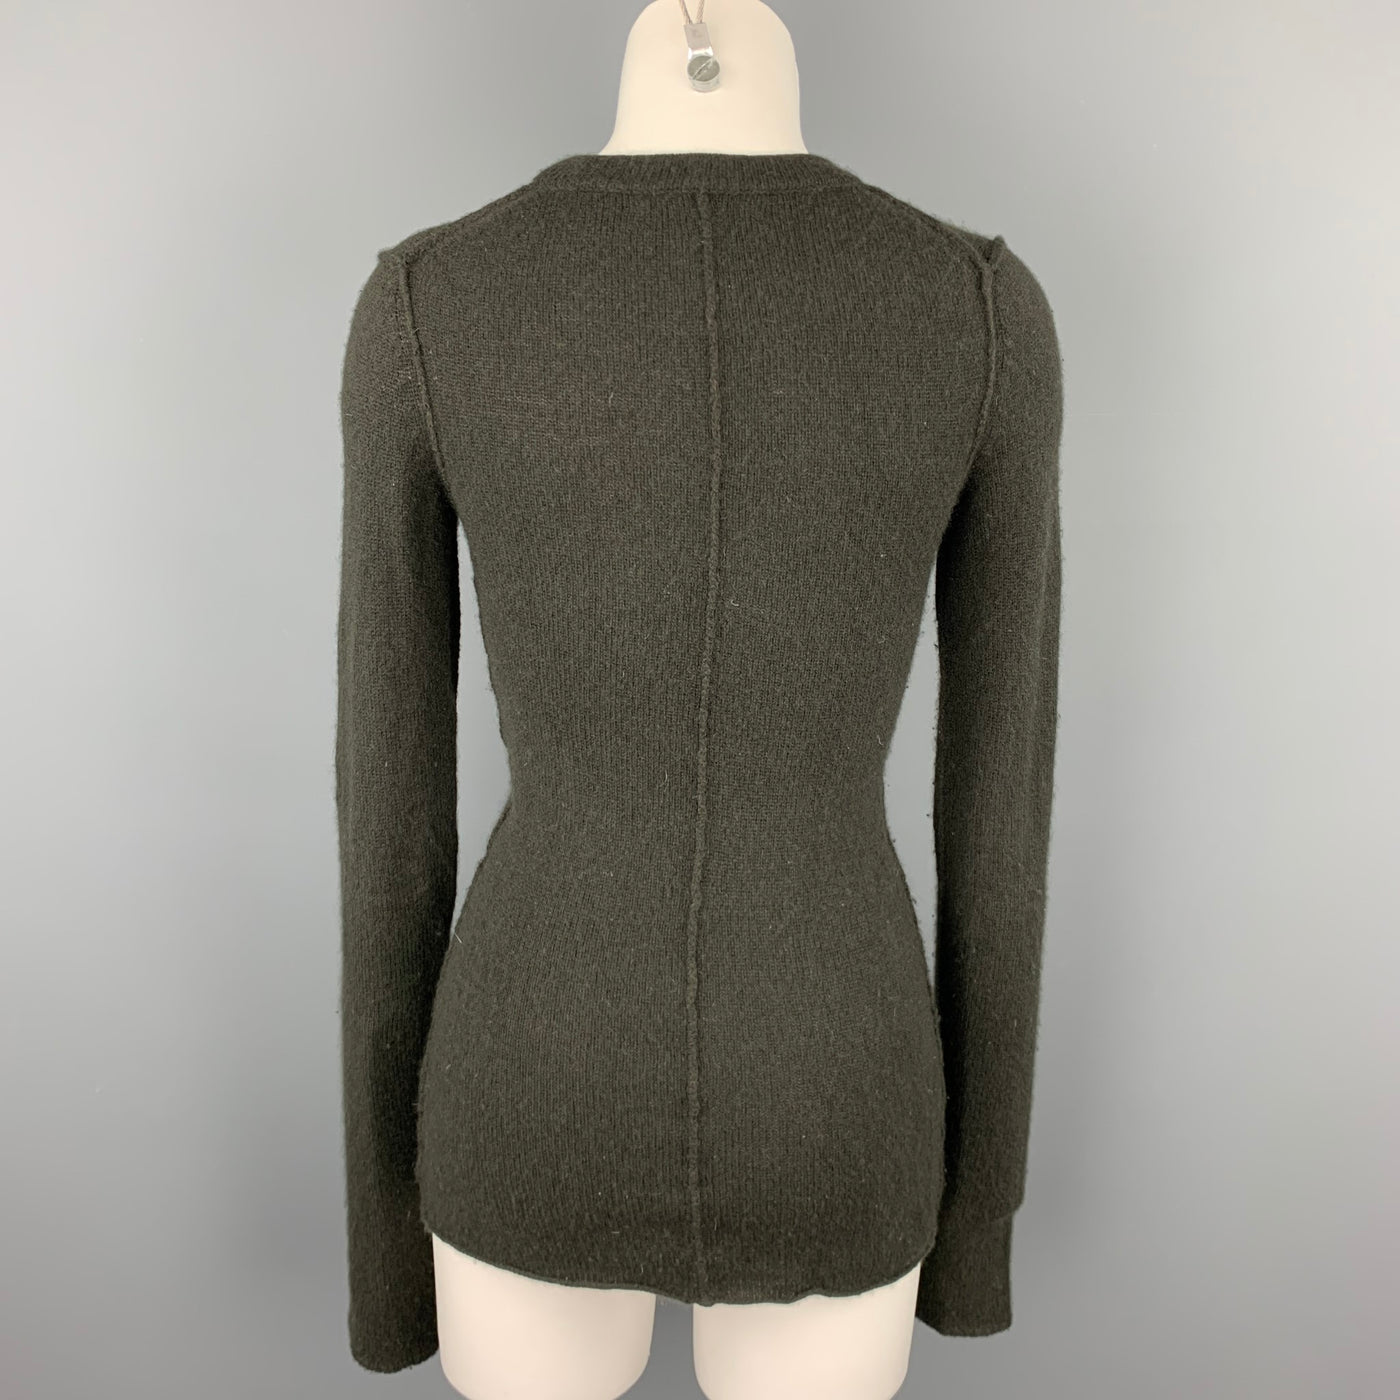 INHABIT Size S Olive Knitted Cashmere Blend Crew-Neck Sweater